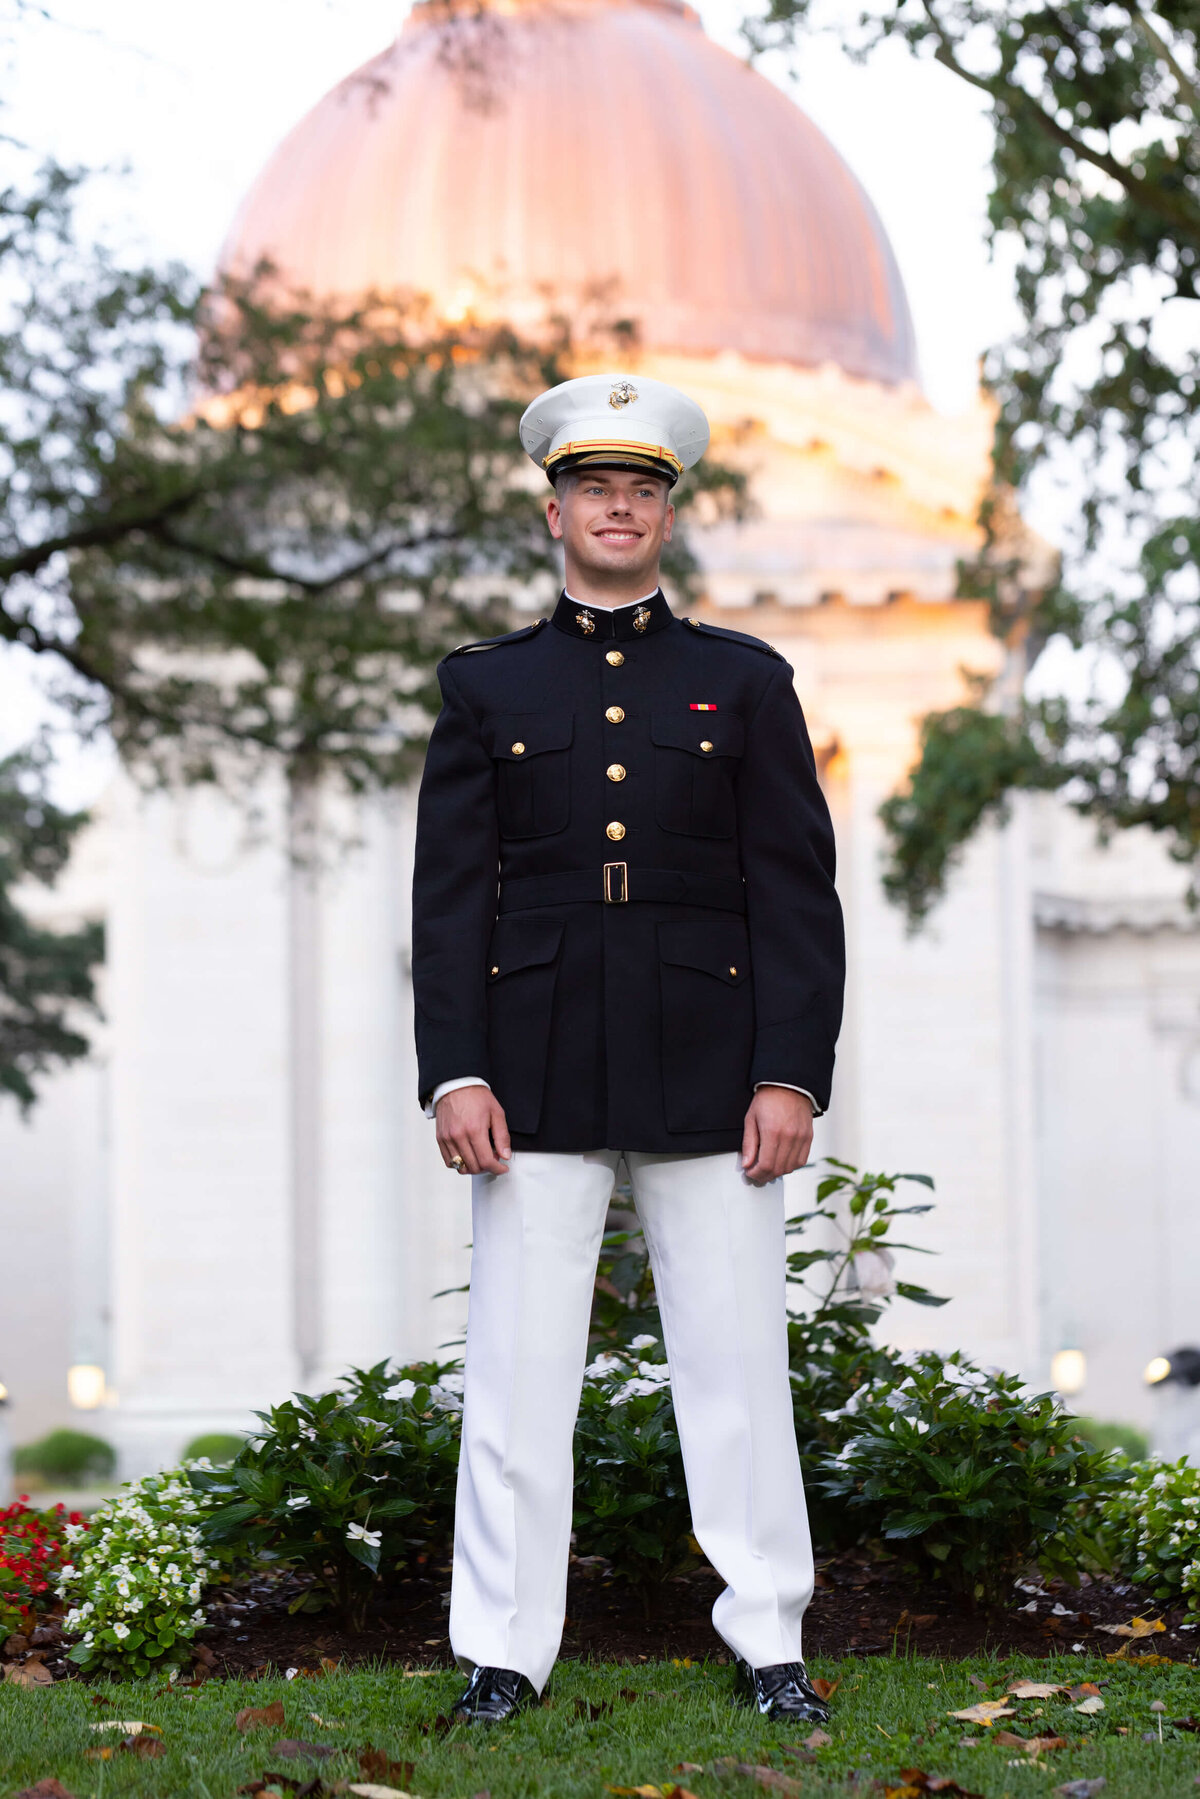 Senior Portrait in Annapolis Maryland of Midshipman inMarine Uniform at Naval Academy Chapel dome with flowers.